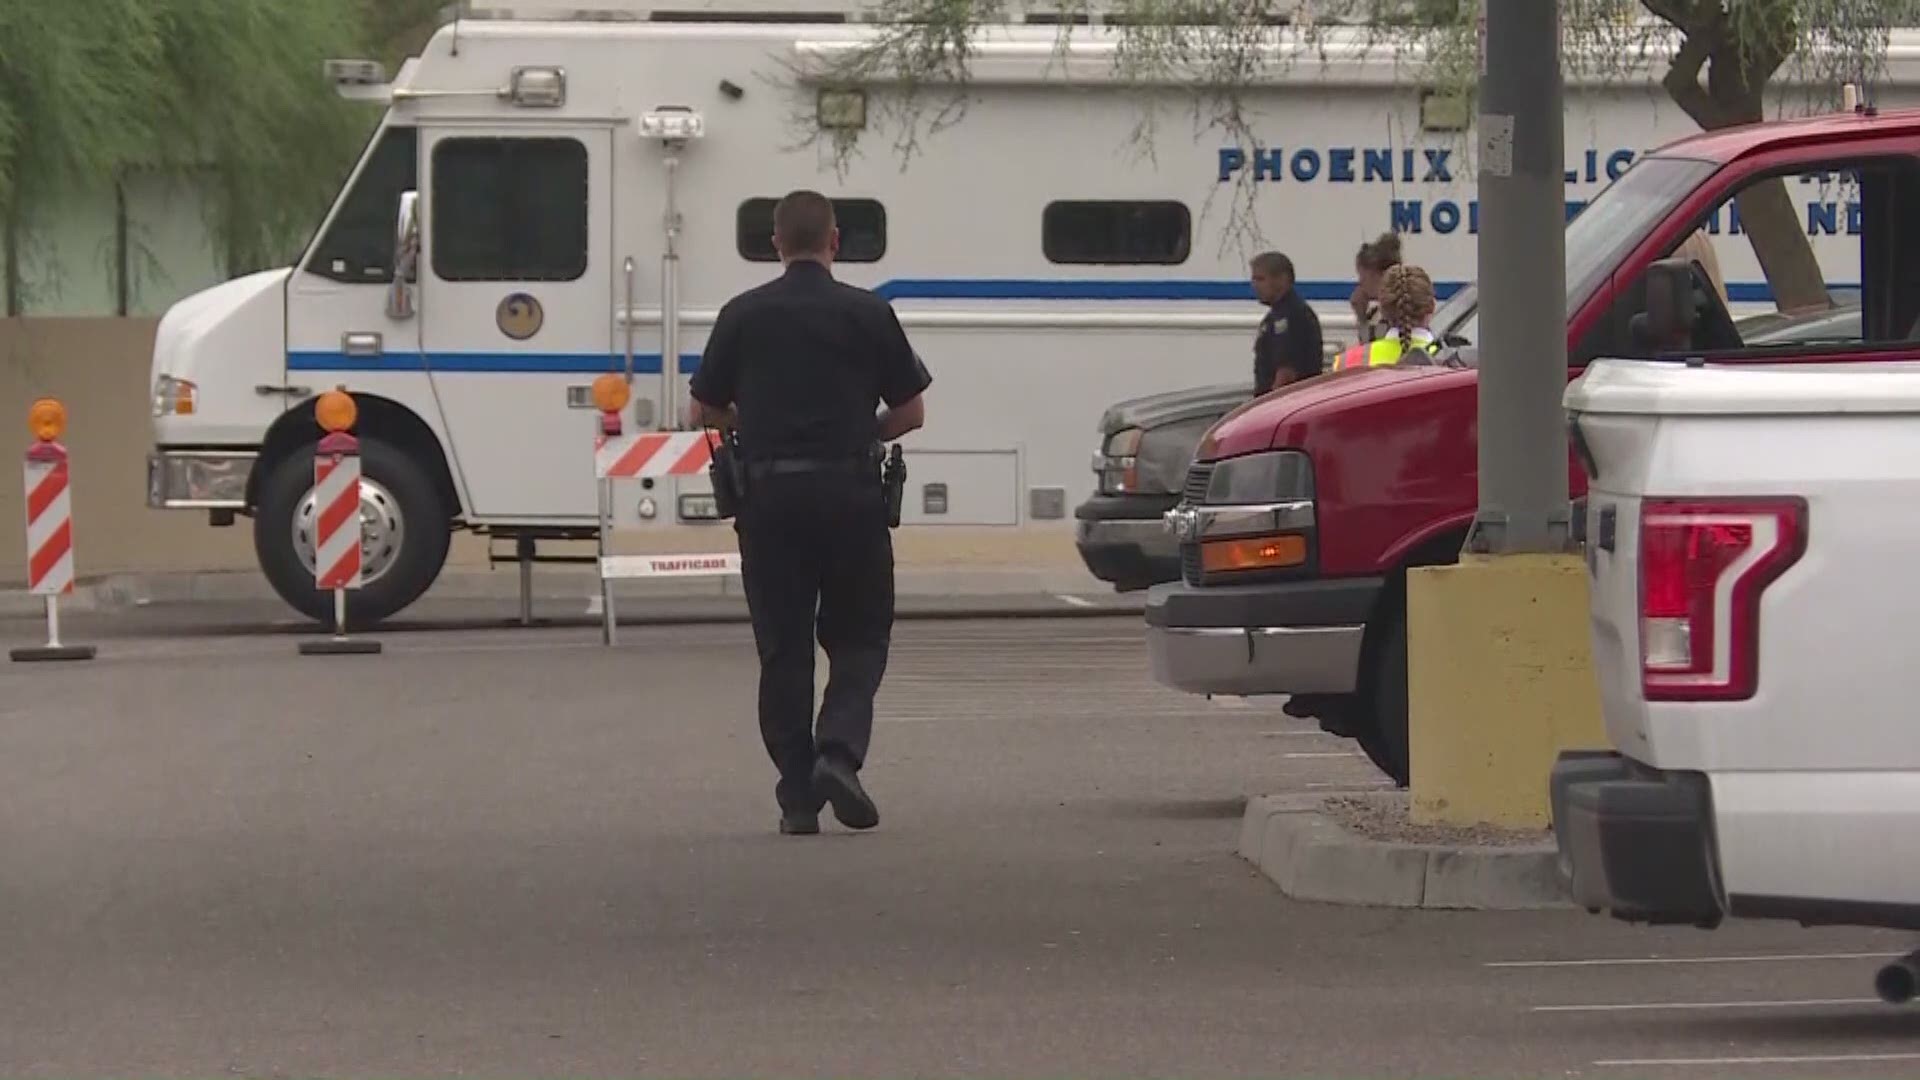 Police say a man died after exchanging gunfire with police. The suspect was hit by a bullet, then hit by traffic on a freeway off ramp in downtown Phoenix.